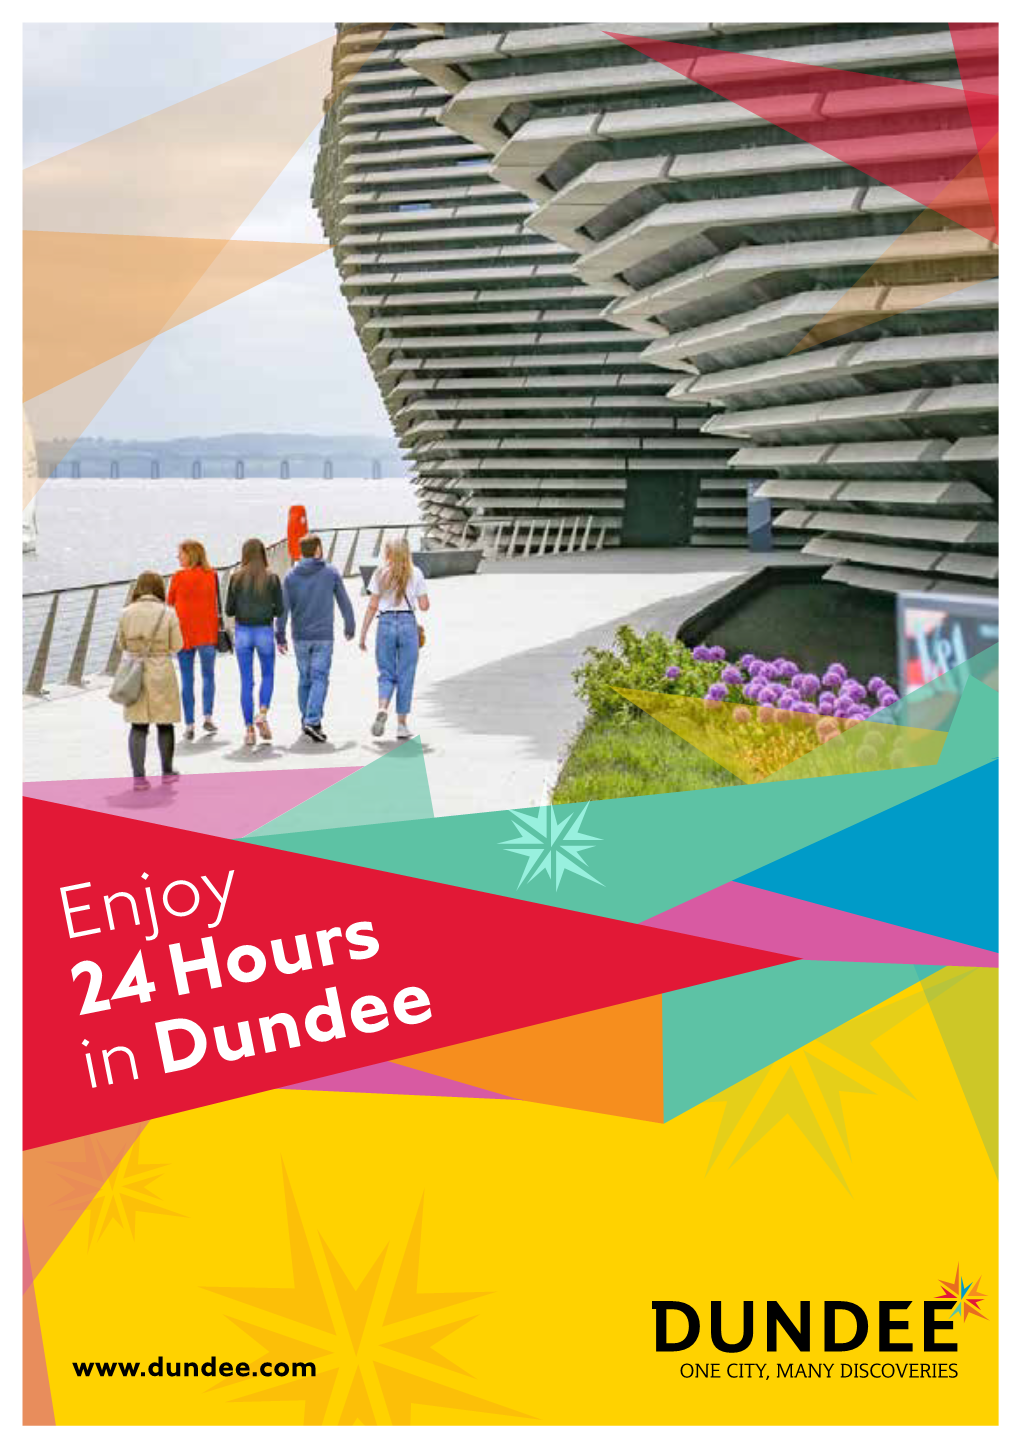 Enjoy 24 Hours in Dundee